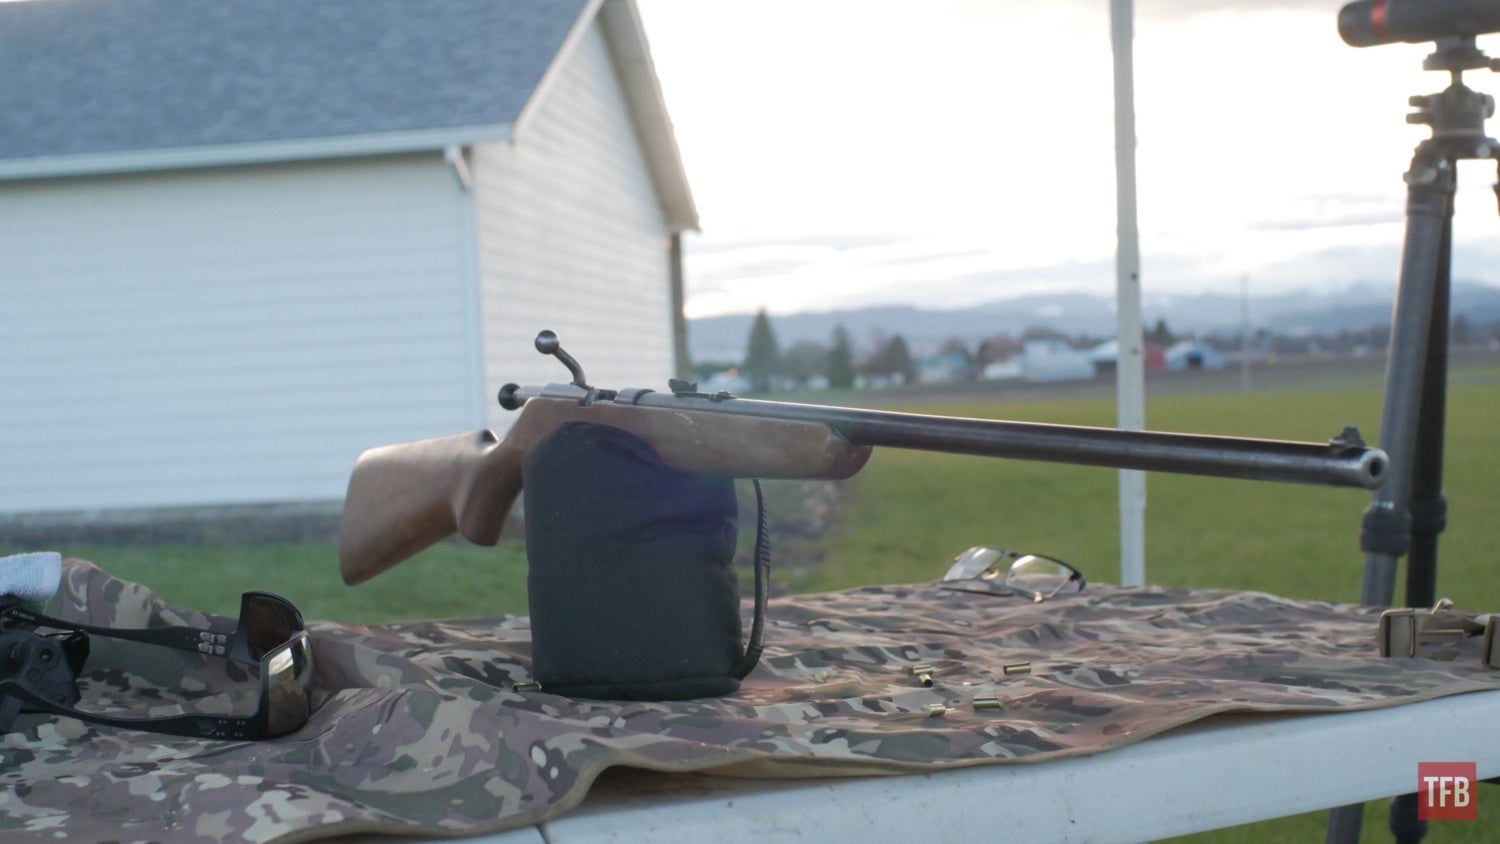 The Rimfire Report: The Ranger Model 103-8 - A Blast from the Past